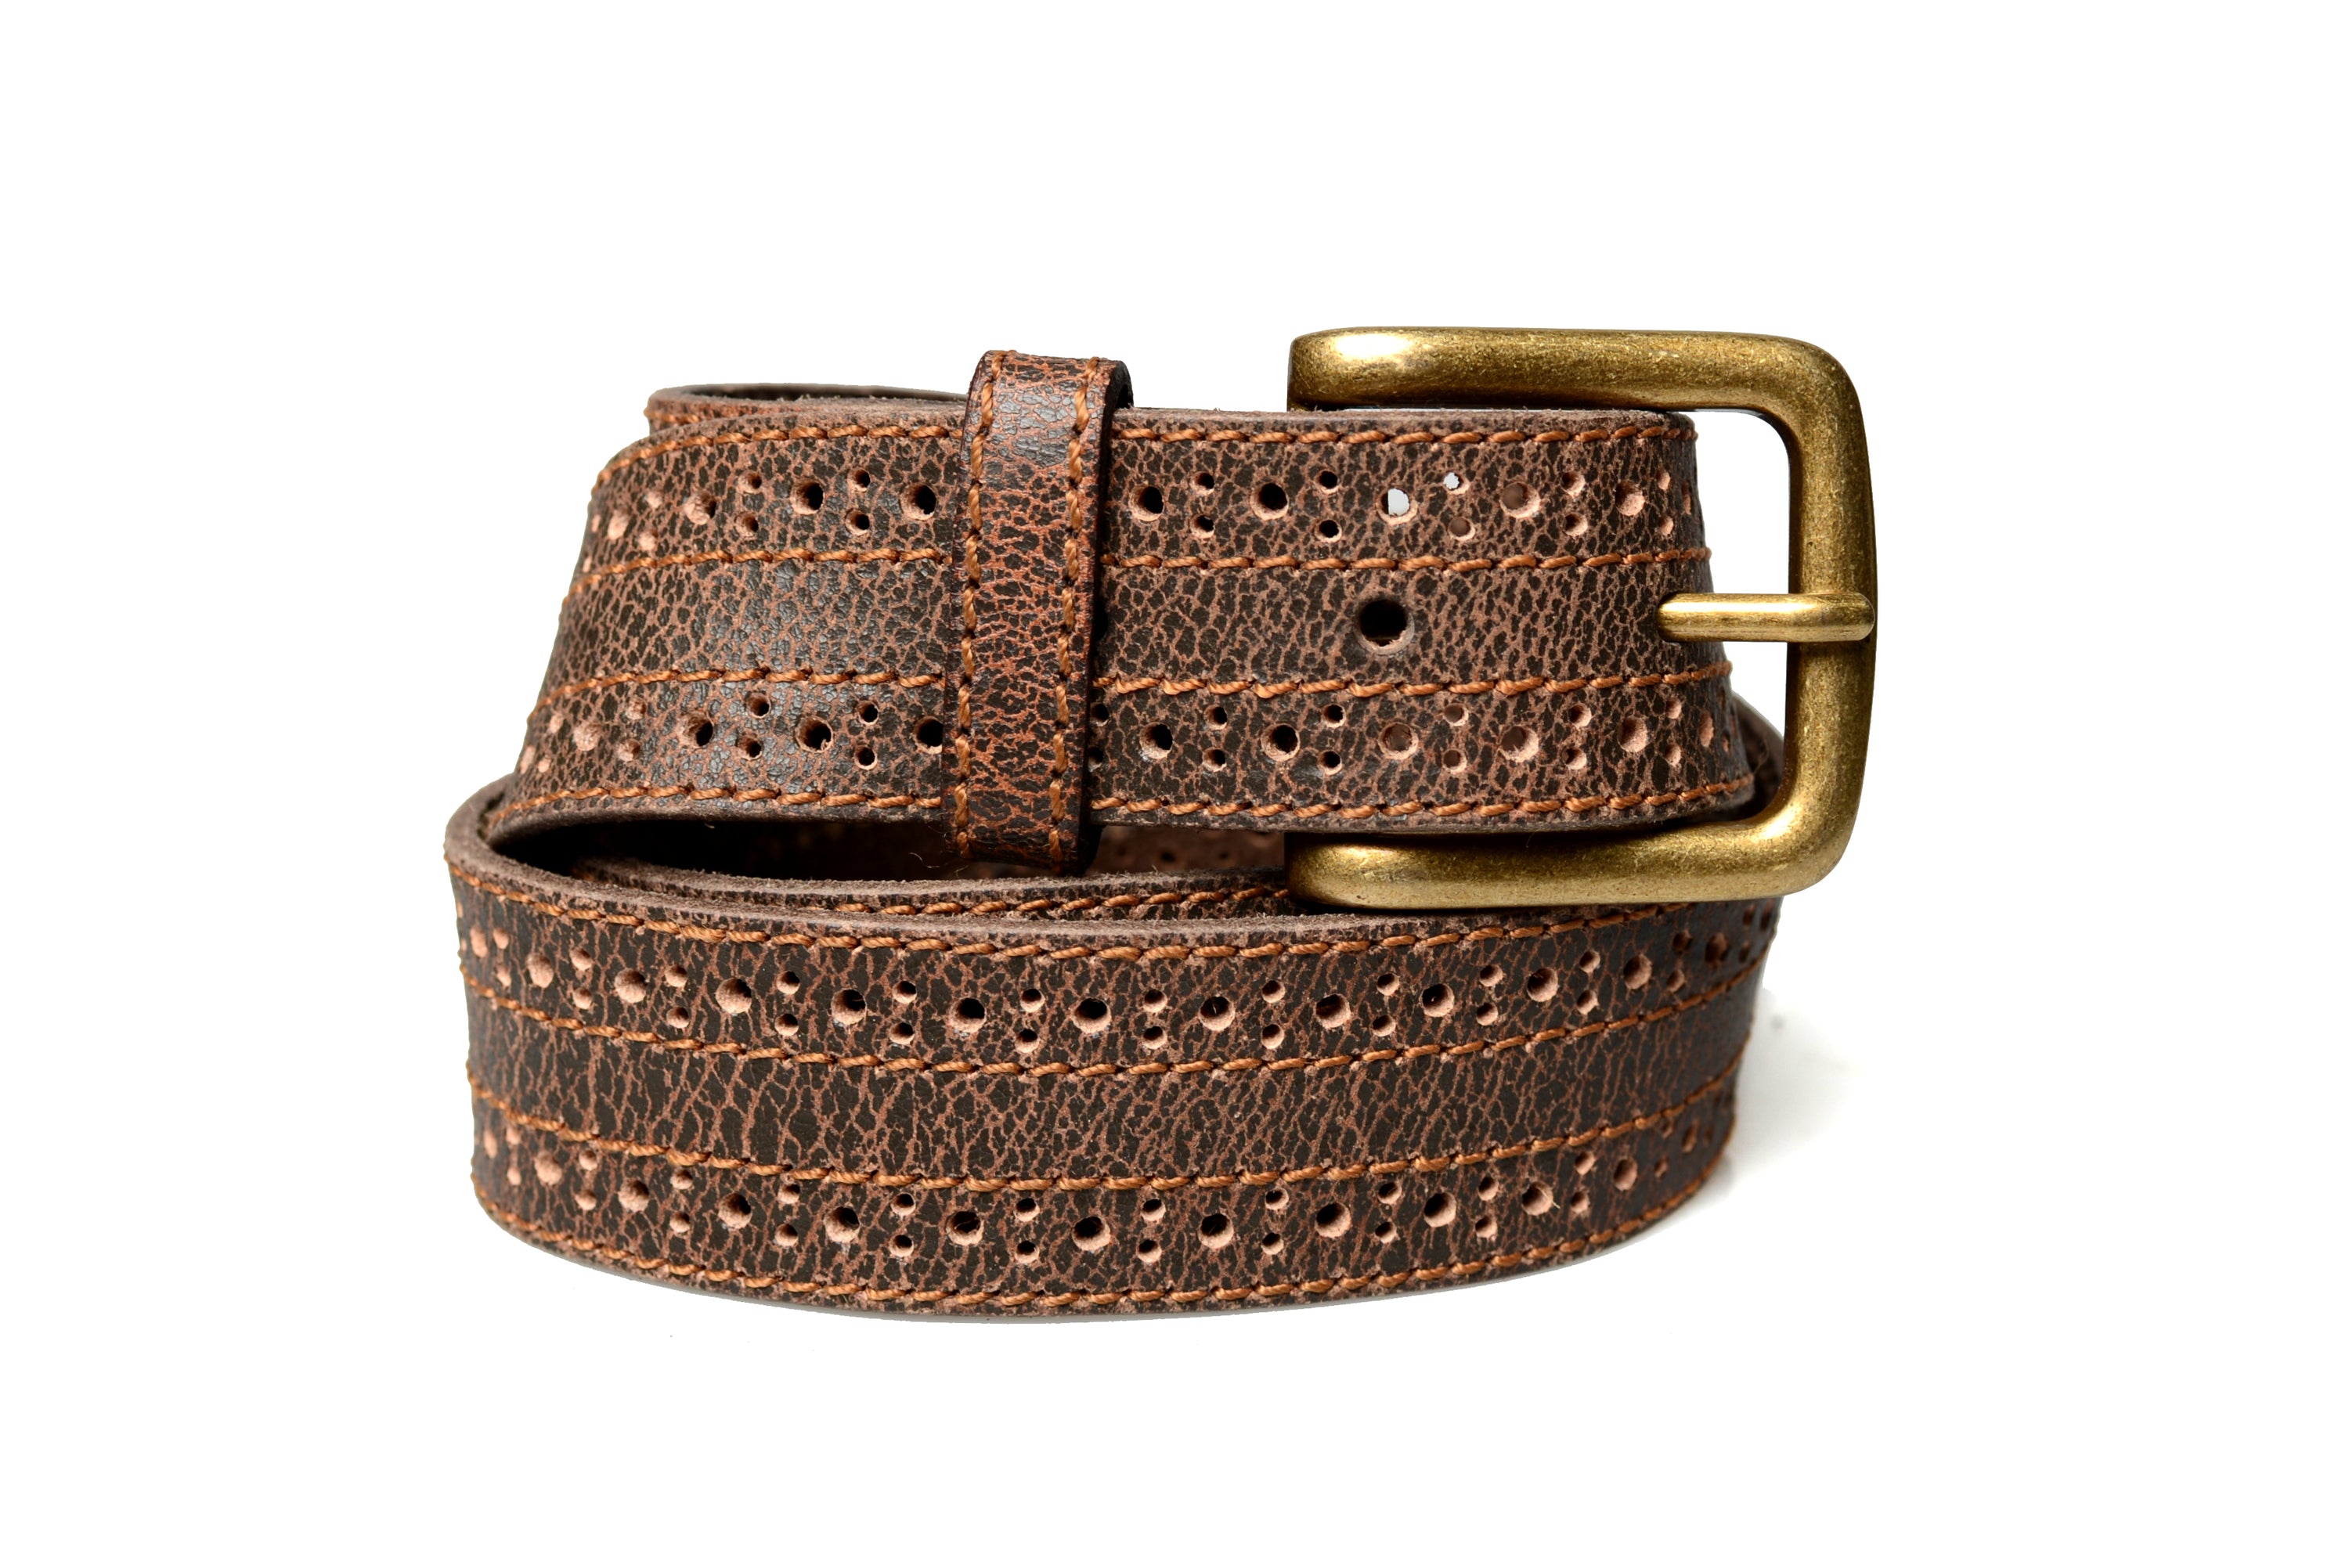 A brown leather belt with a brass buckle and silver grommets by Bed Stu's Addison.